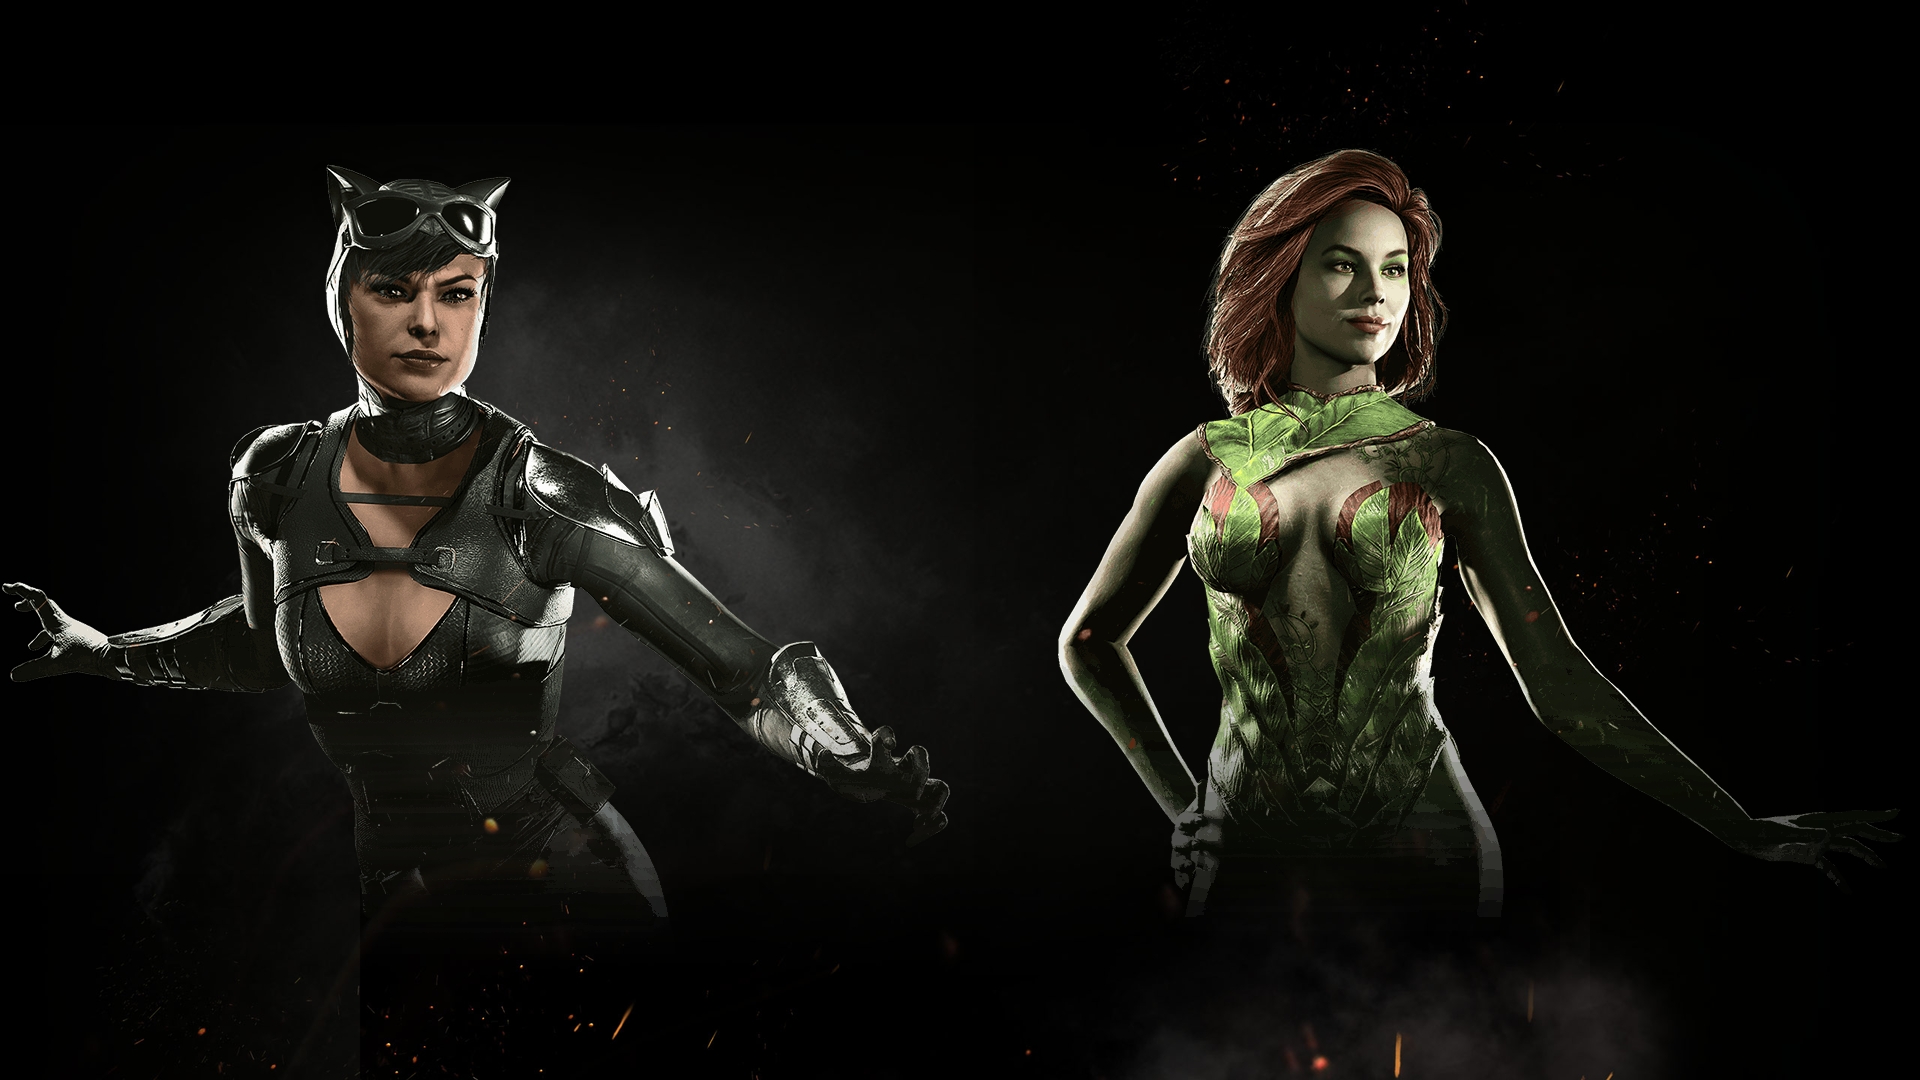 New 'Injustice 2' trailer shows Catwoman and Poison Ivy in action...